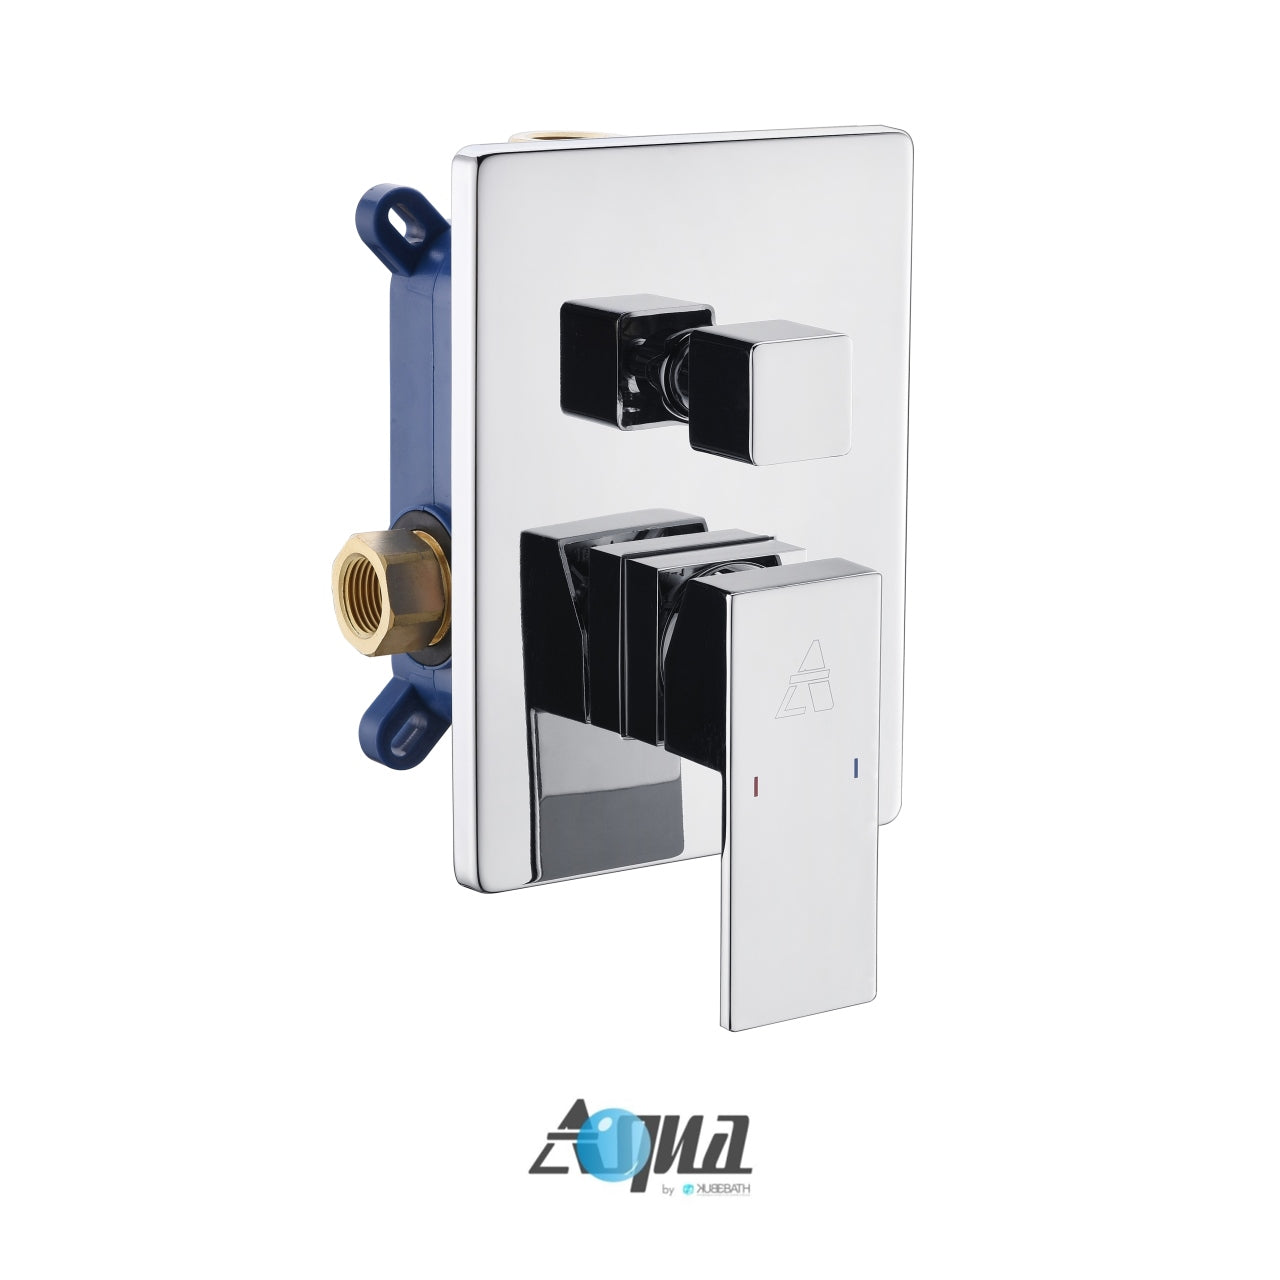 Aqua Piazza Brass Shower Set with Ceiling Mount Square Rain Shower and Tub Filler - Home and Bath Depot